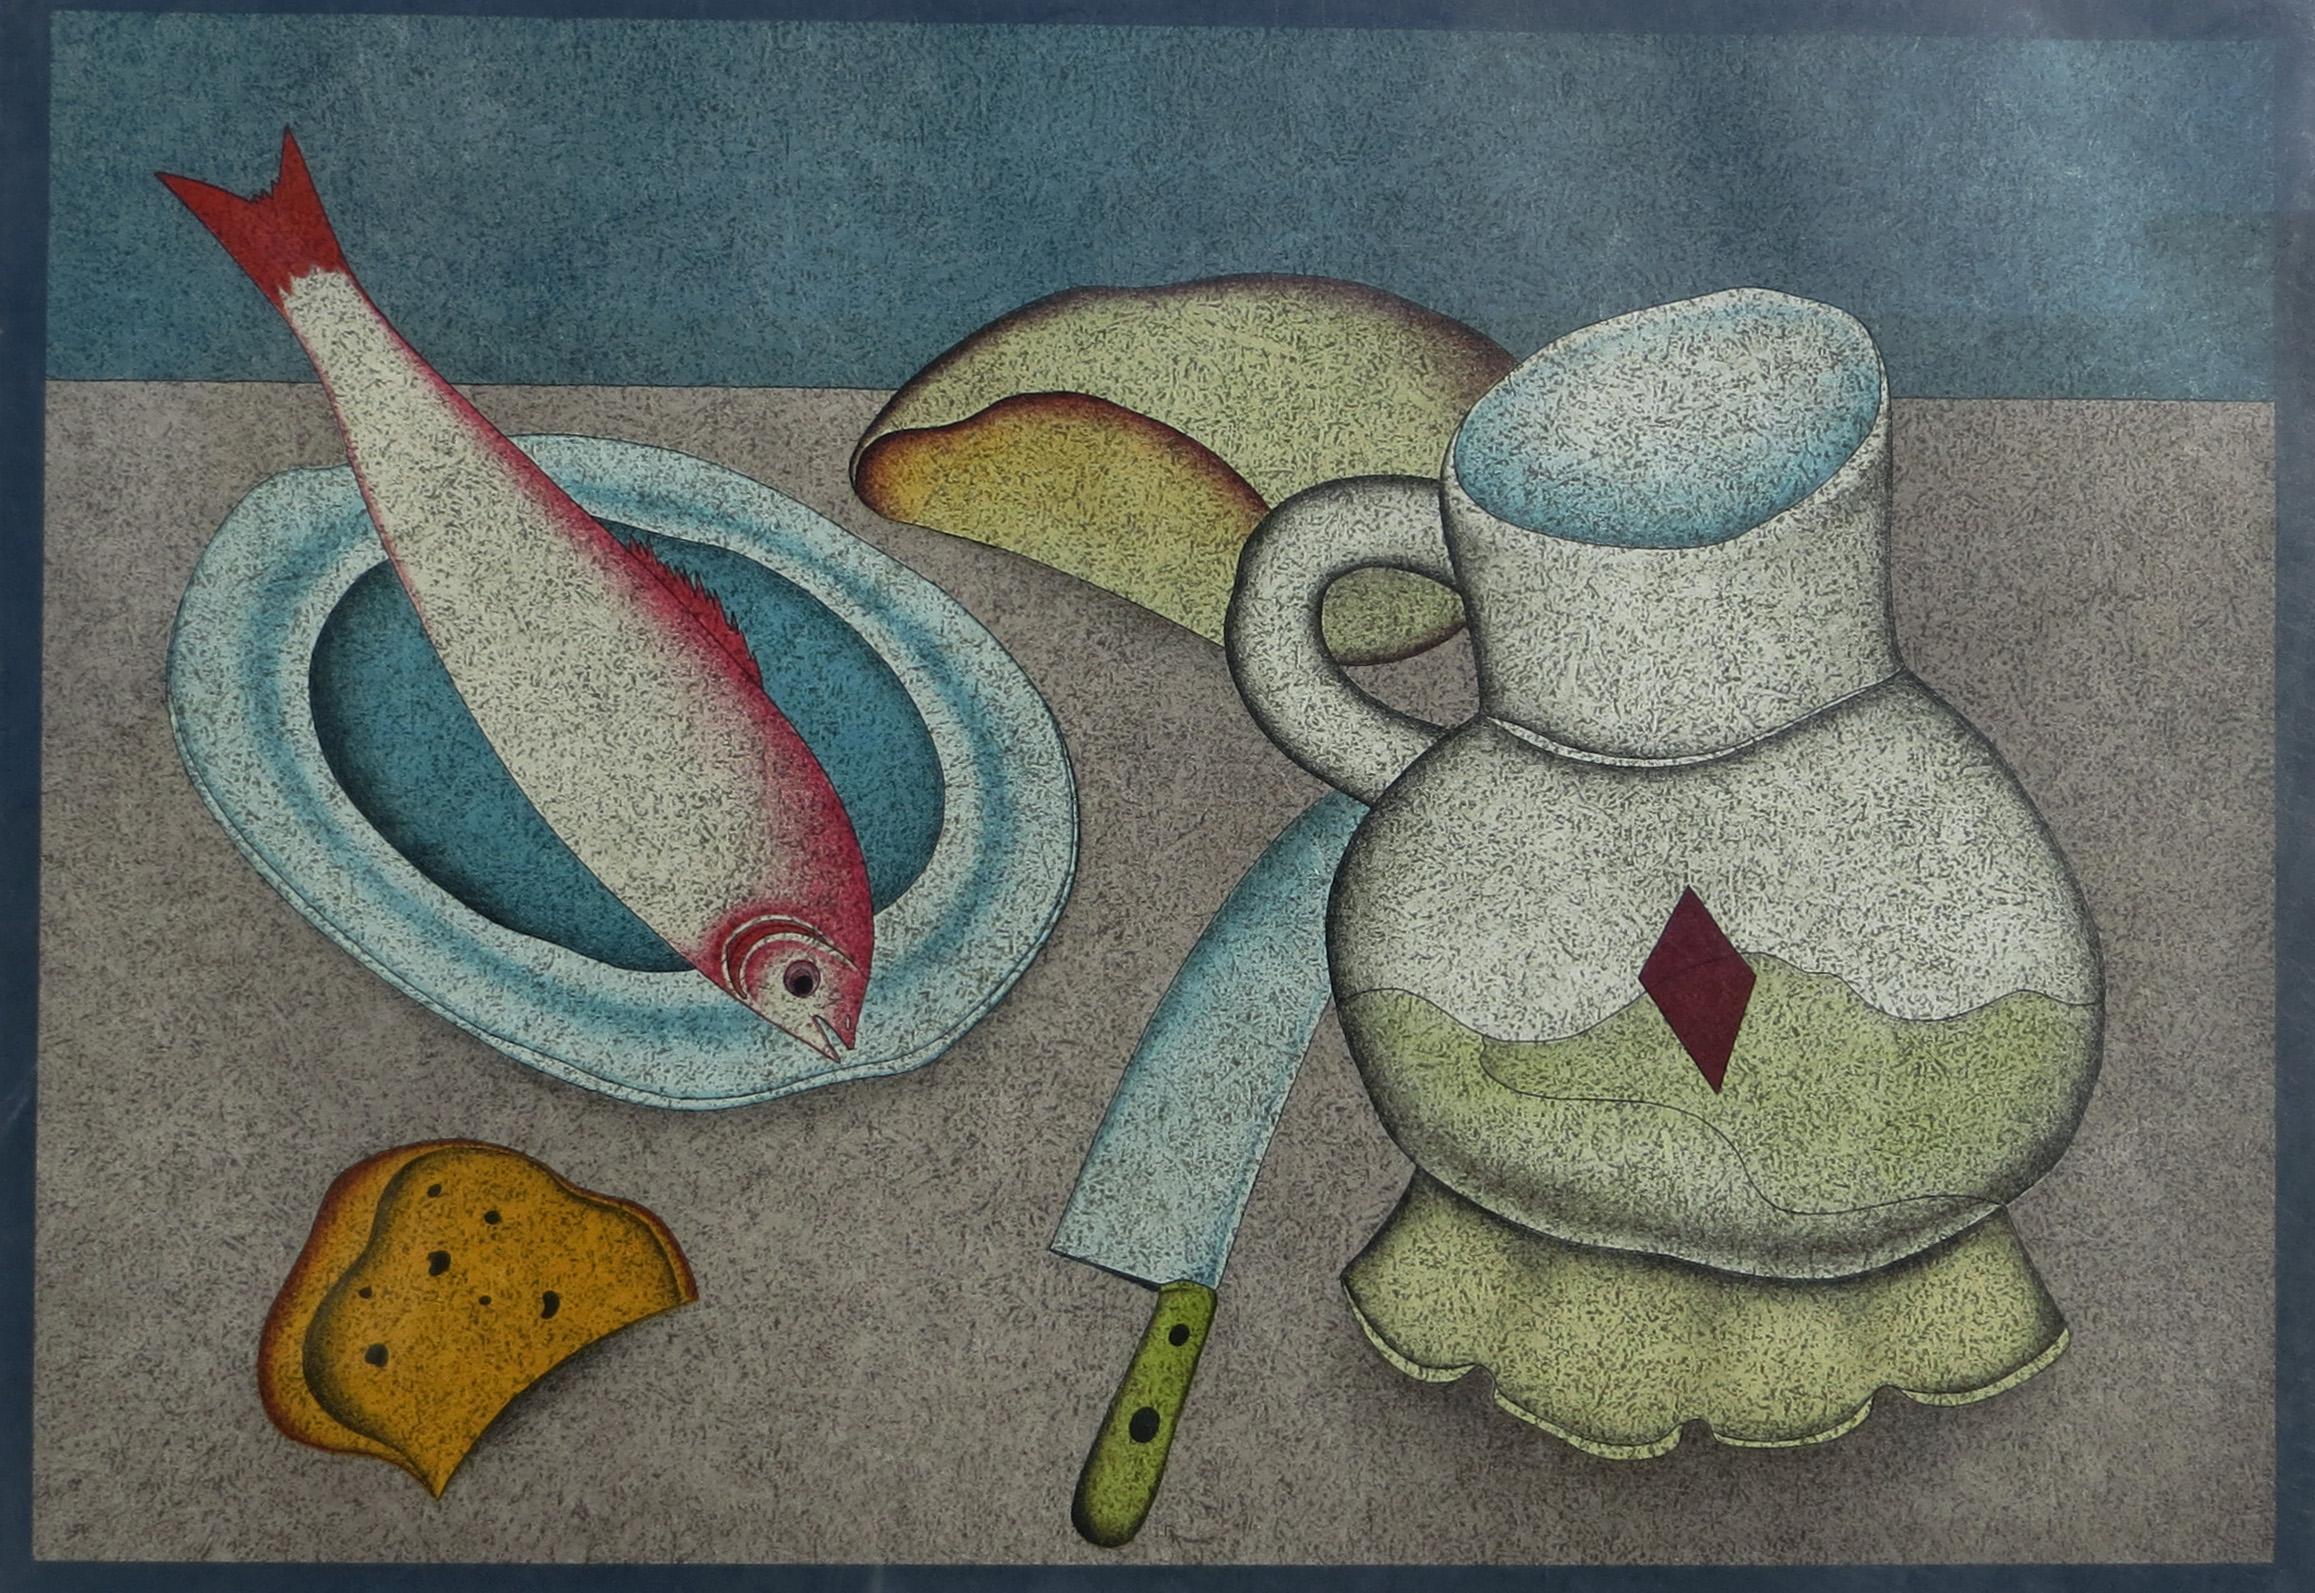 Still Life with Fish, Bread and Knife - Print by Mihail Chemiakin